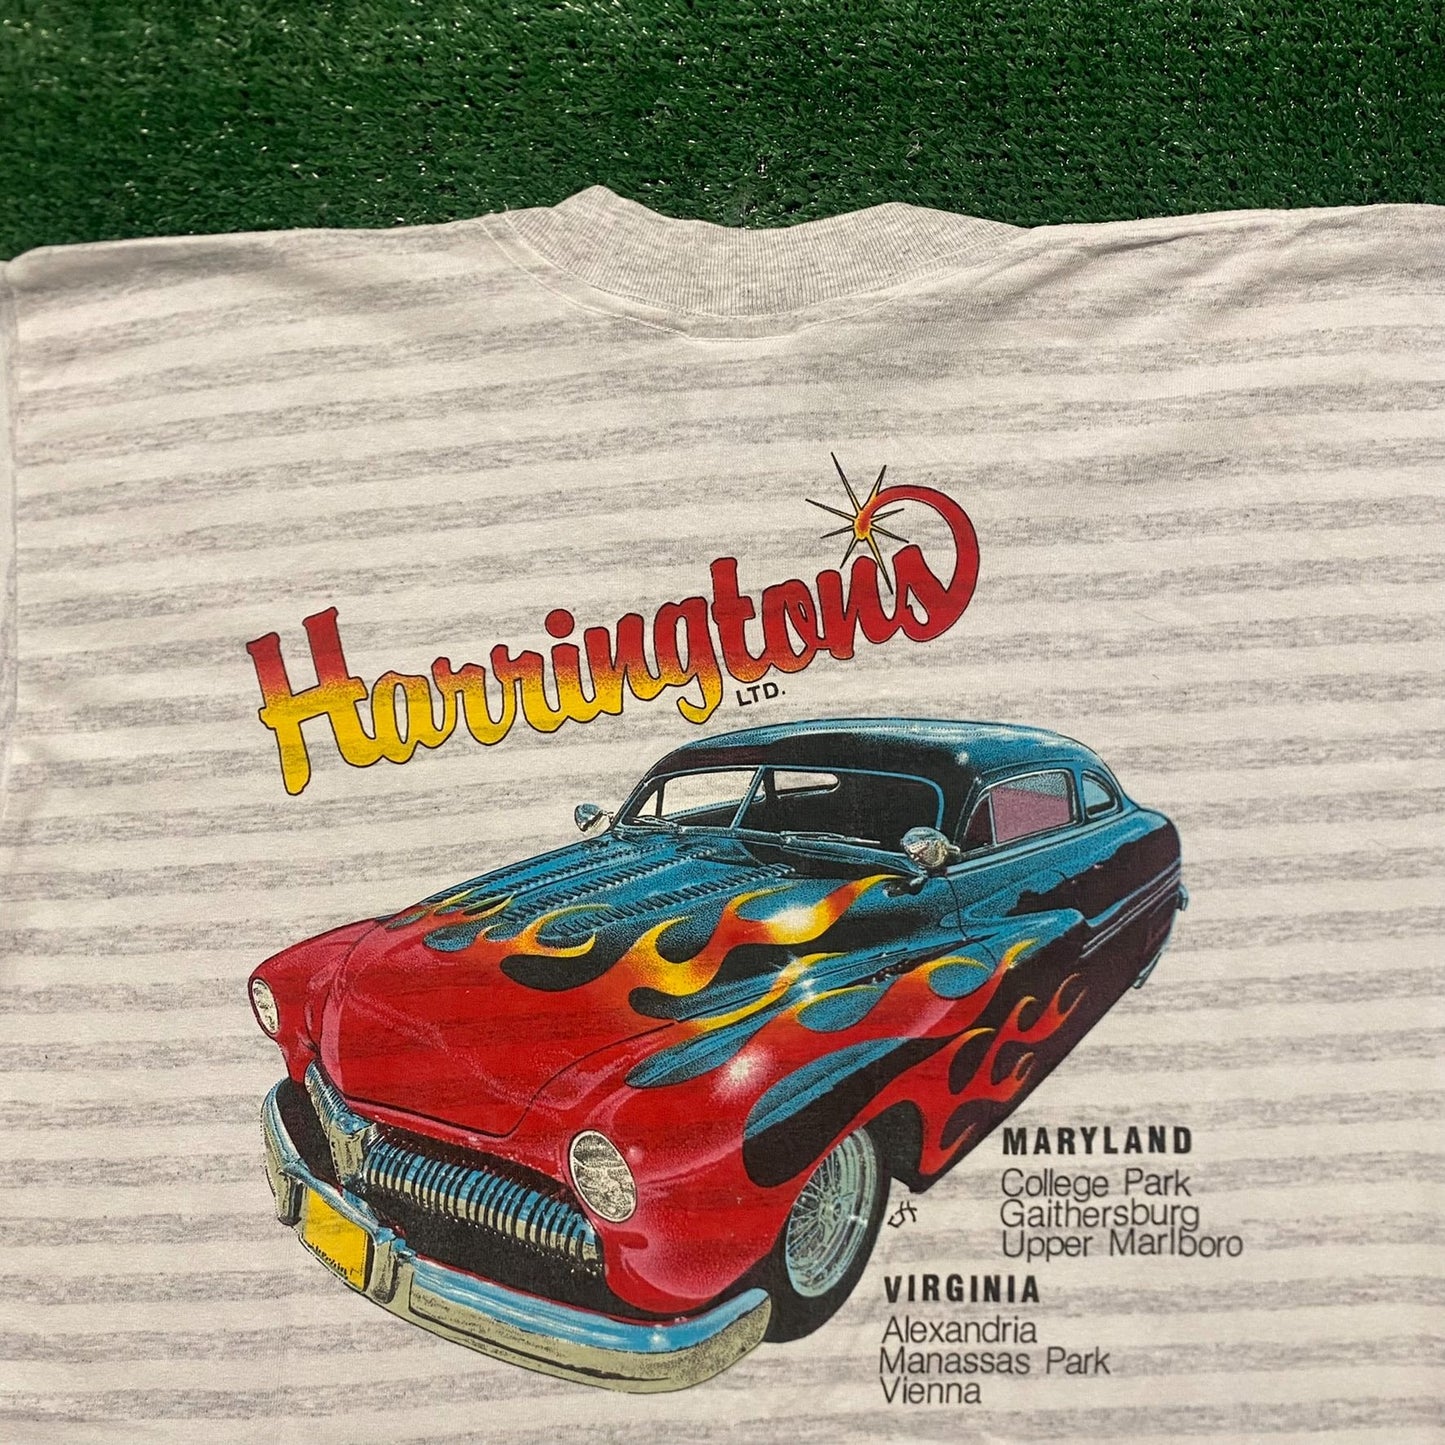 Hot Rods Vintage 90s Striped Racing T-Shirt